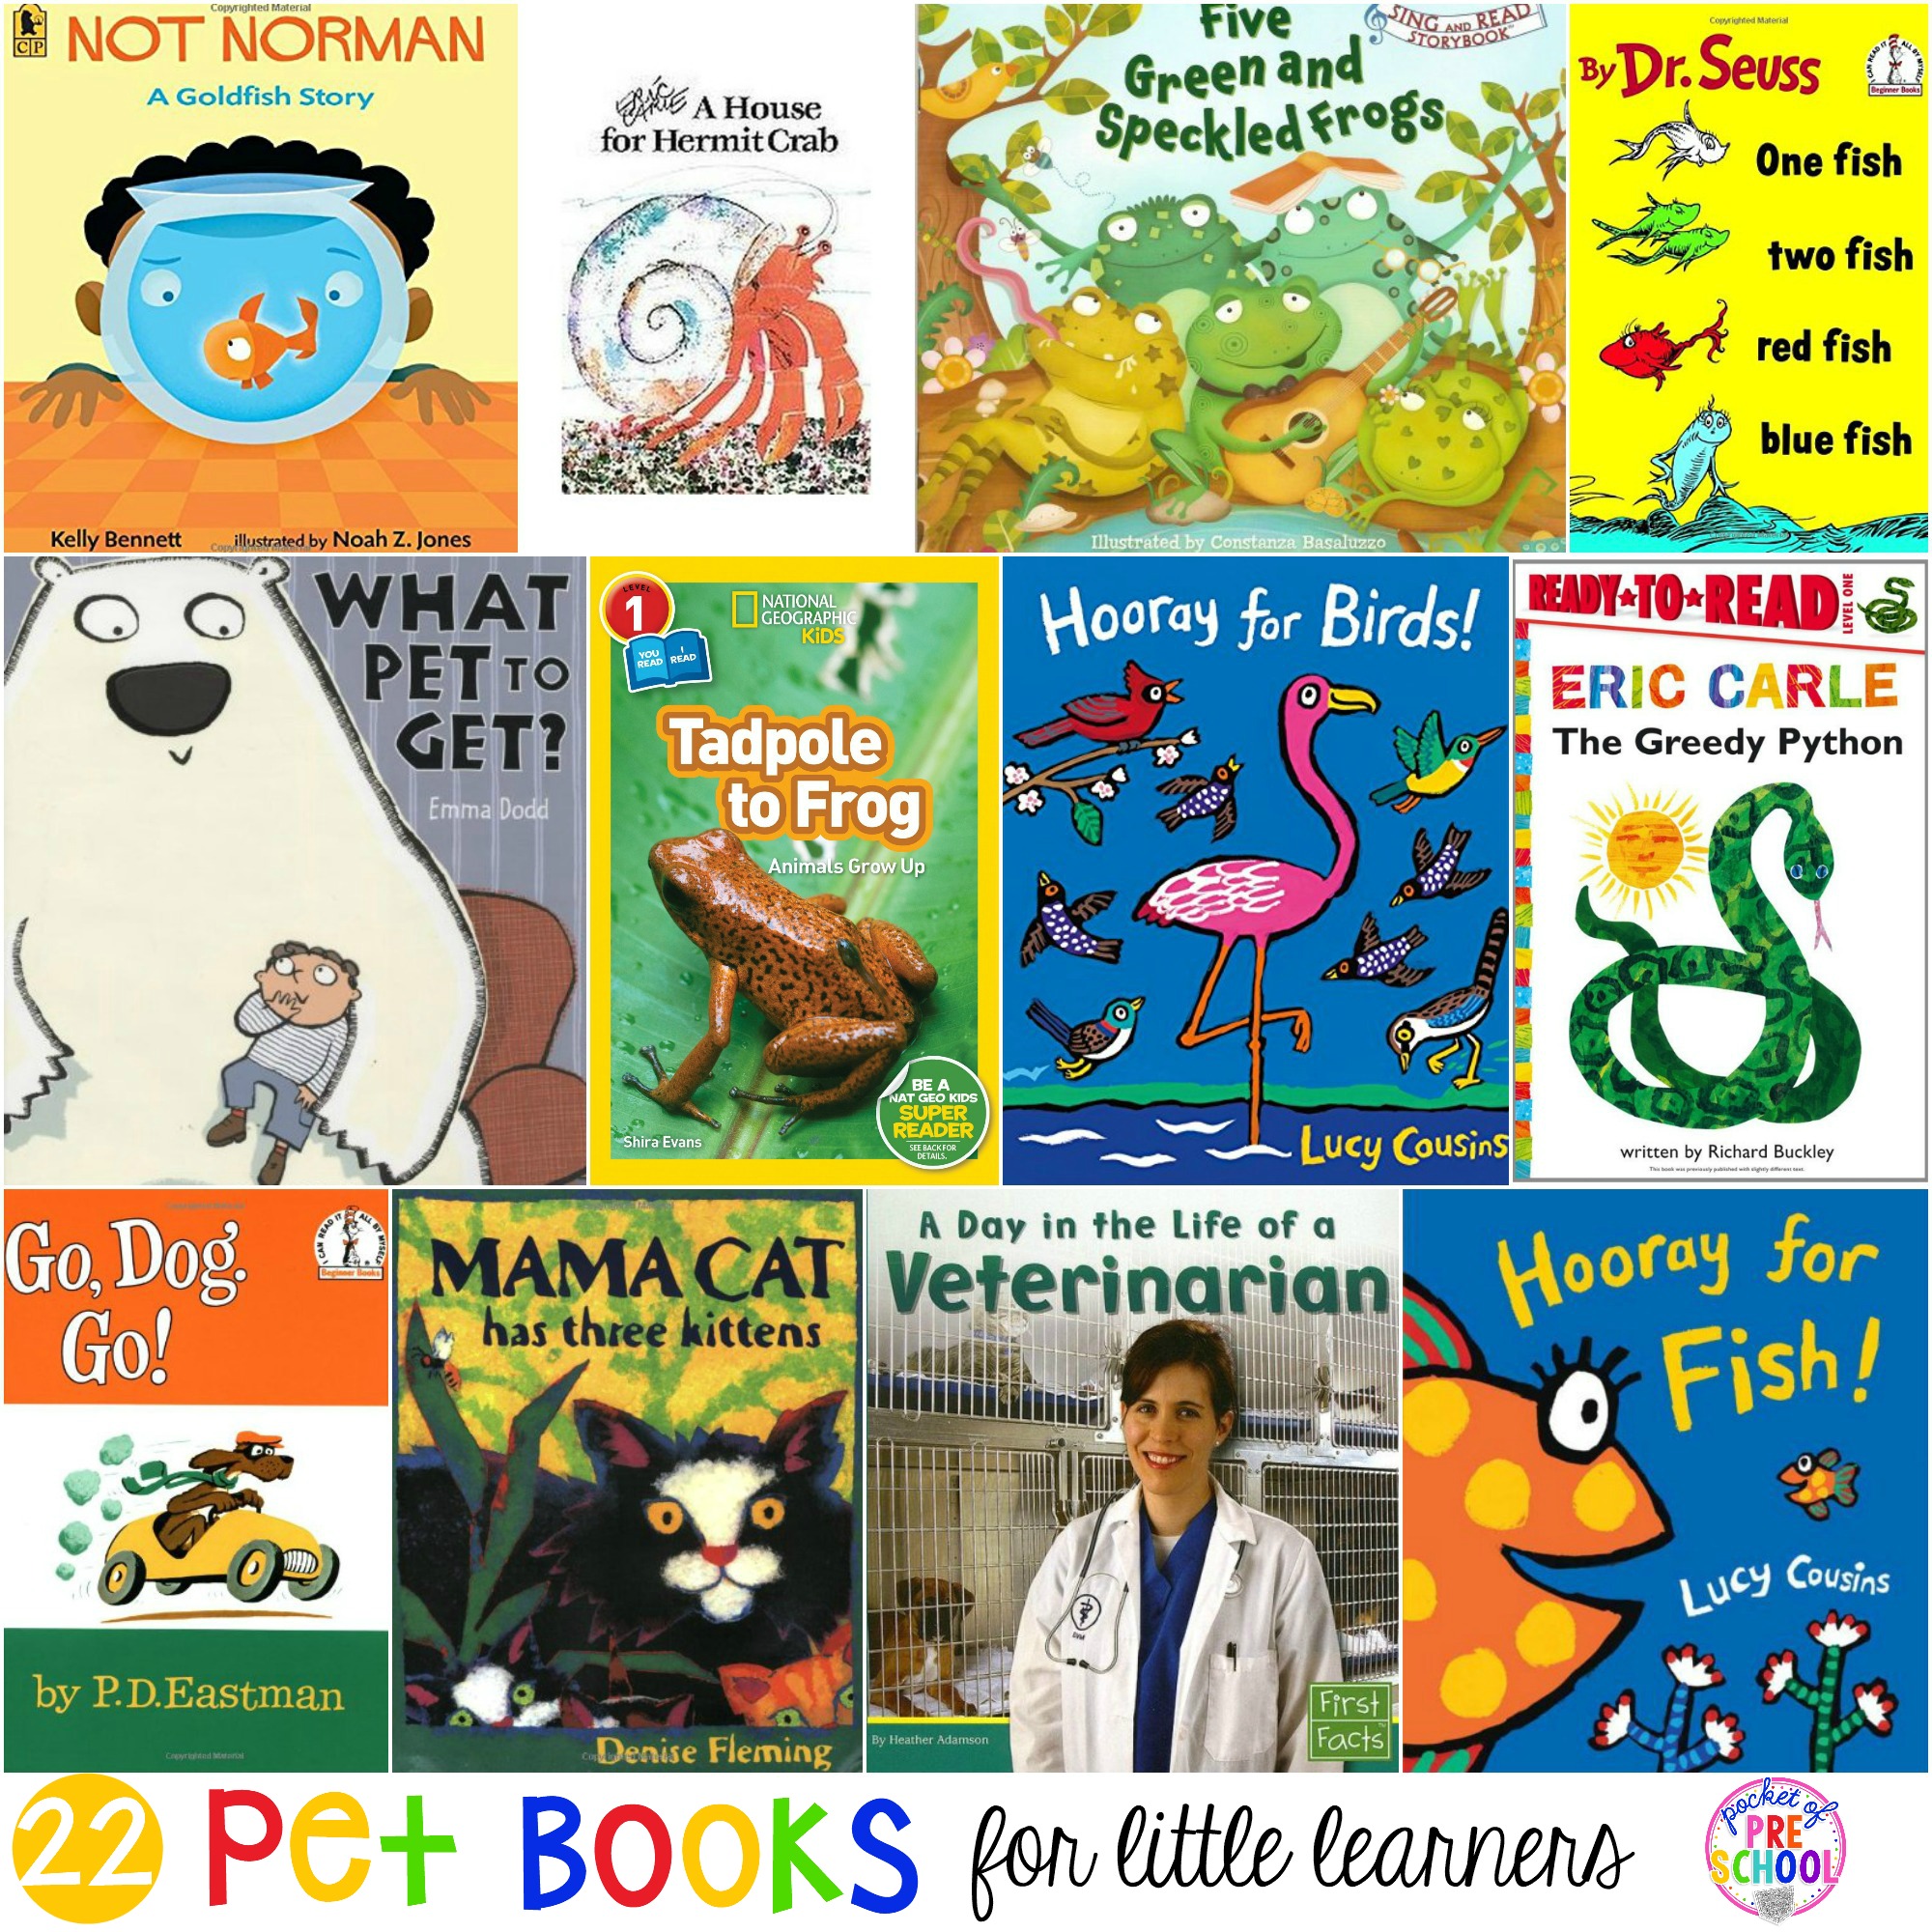 HUGE Pet book list perfect for preschool, pre-k, and kindergarten. From fish, dogs, frogs, cats, and hamsters these furry characters are sure to become classroom friends in no time thanks to these pet books.